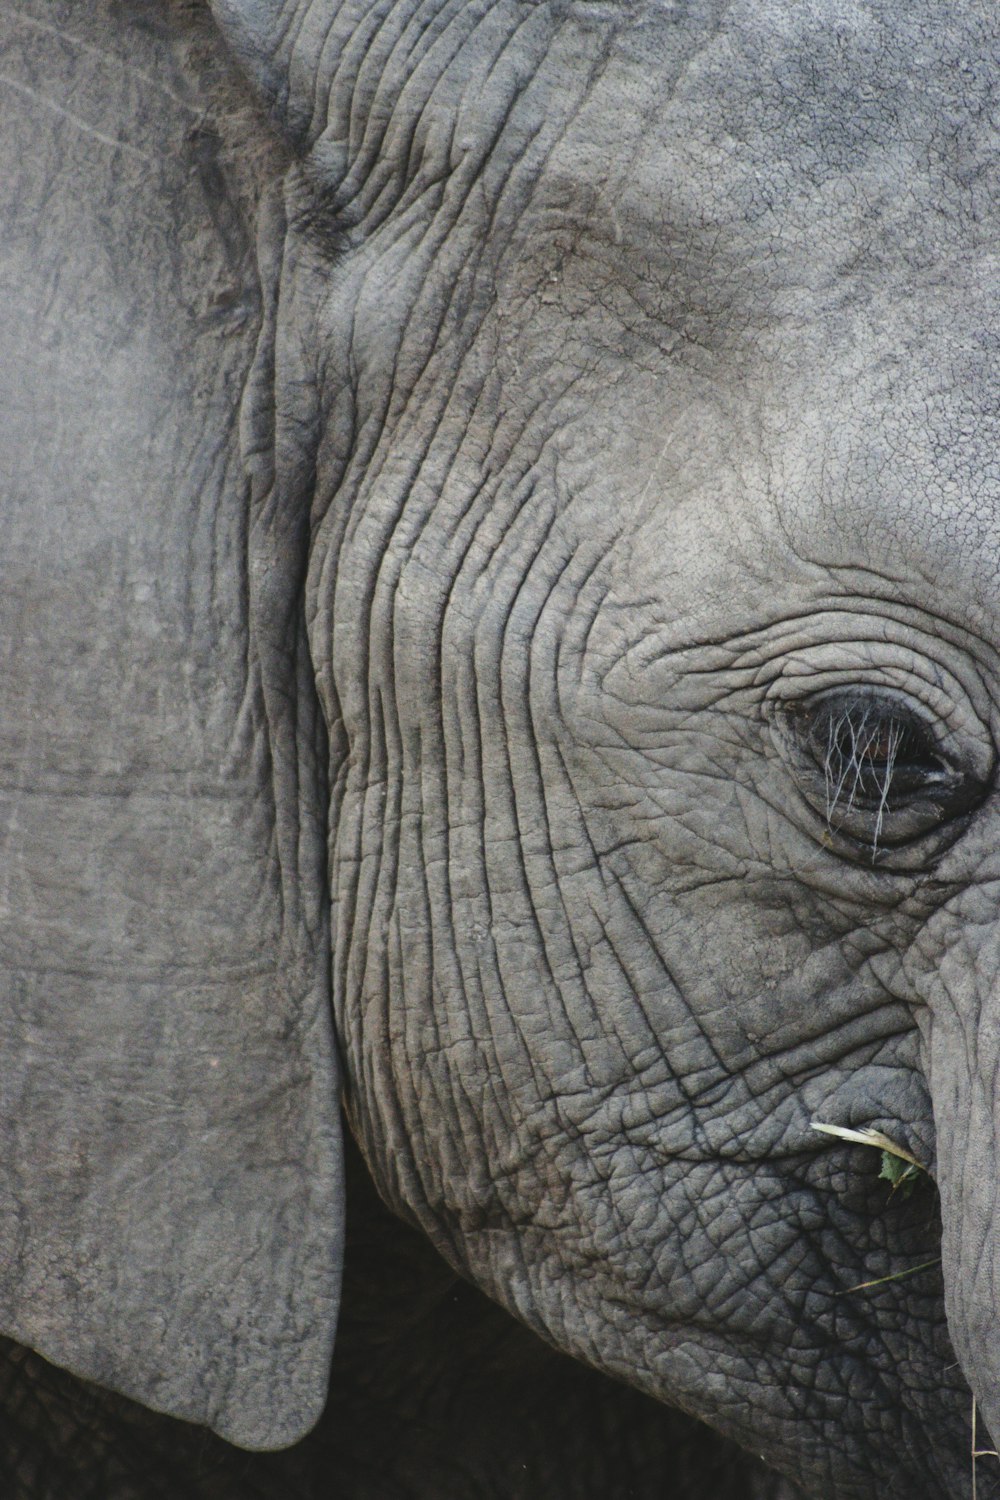 an elephant with its nose up